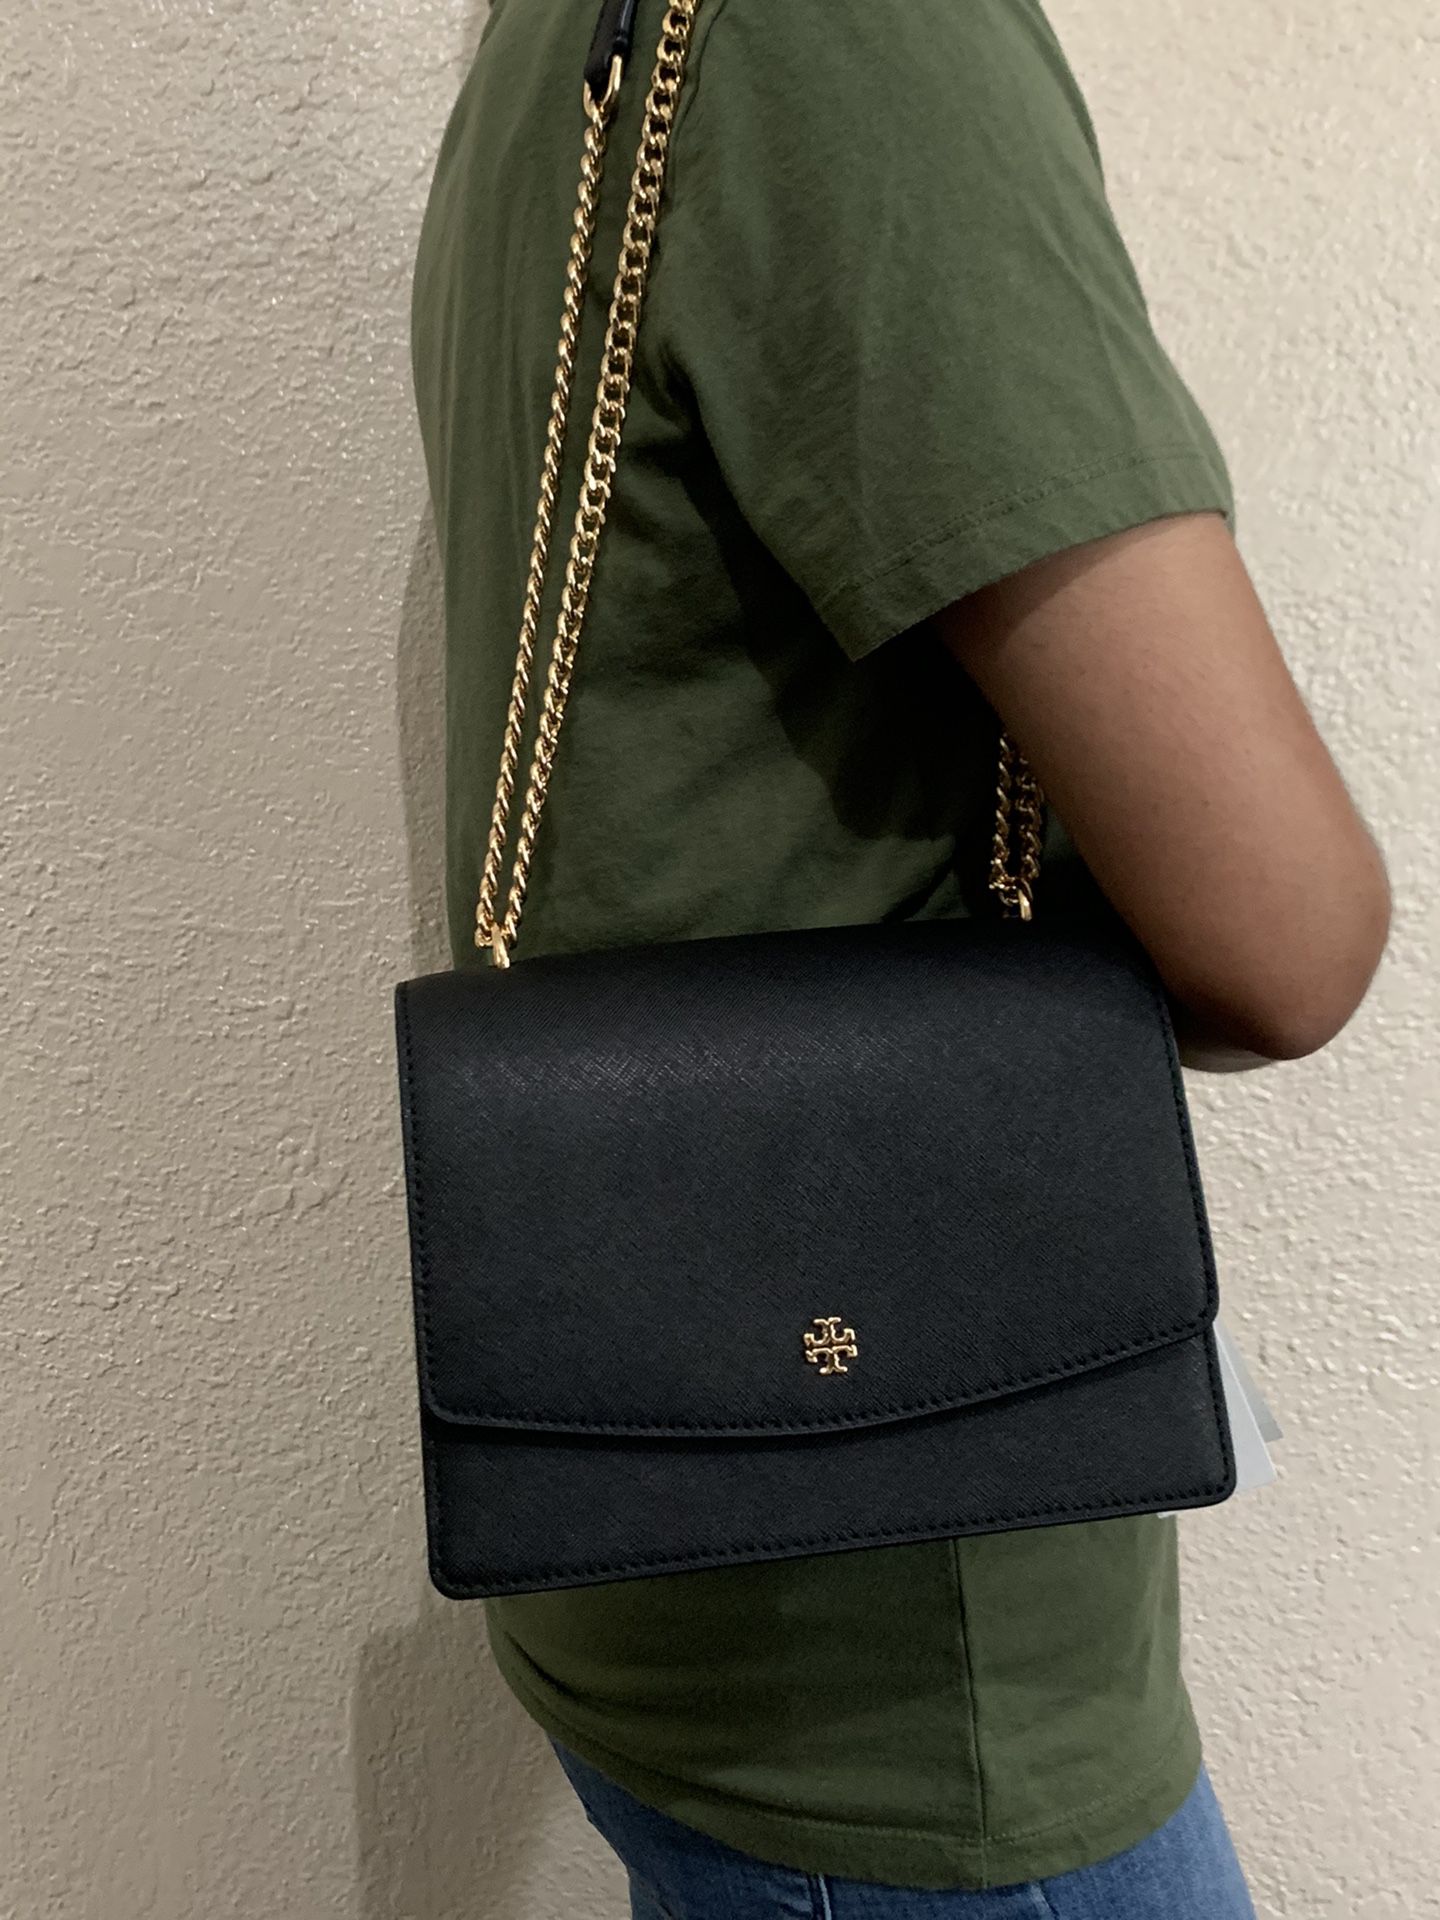 Tory Burch Adjustable Bag for Sale in Naval Air Station Point Mugu, CA ...